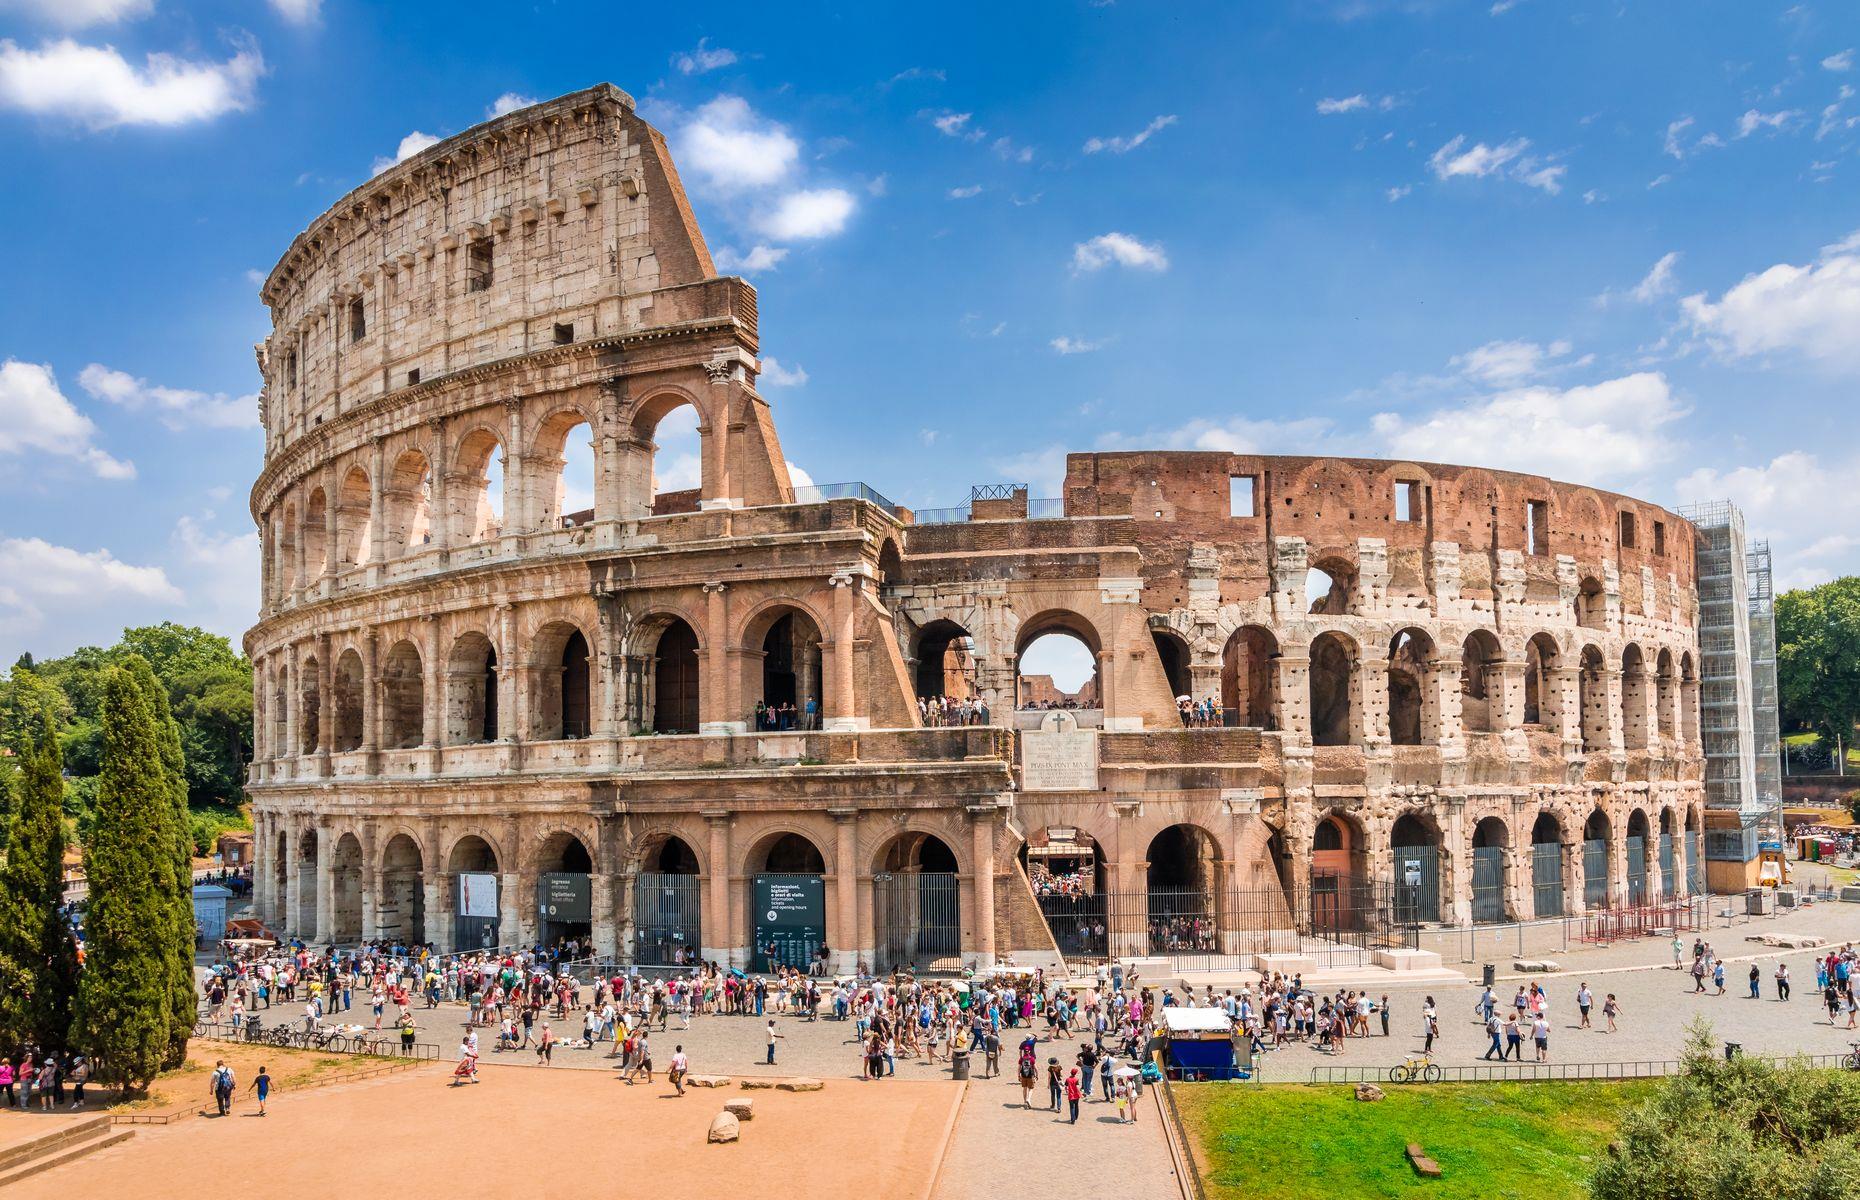 <p>No visit to Rome would be complete without seeing The Colosseum. Particularly good for slightly older children who’ve started learning about ancient Rome at school, <a href="https://livtours.com/tours/private-family-experiences-colosseum-tour-for-kids/?af_code=K9GG2J9">certain tours</a> put kids at the heart of the Colosseum experience, with treasure maps, gadgets and quizzes helping them imagine what the gladiators saw (and smelled) as they prepared to face tigers and other frightening beasts from across the Roman Empire. To avoid disappointment or a lengthy queue, tickets are best booked in advance.</p>